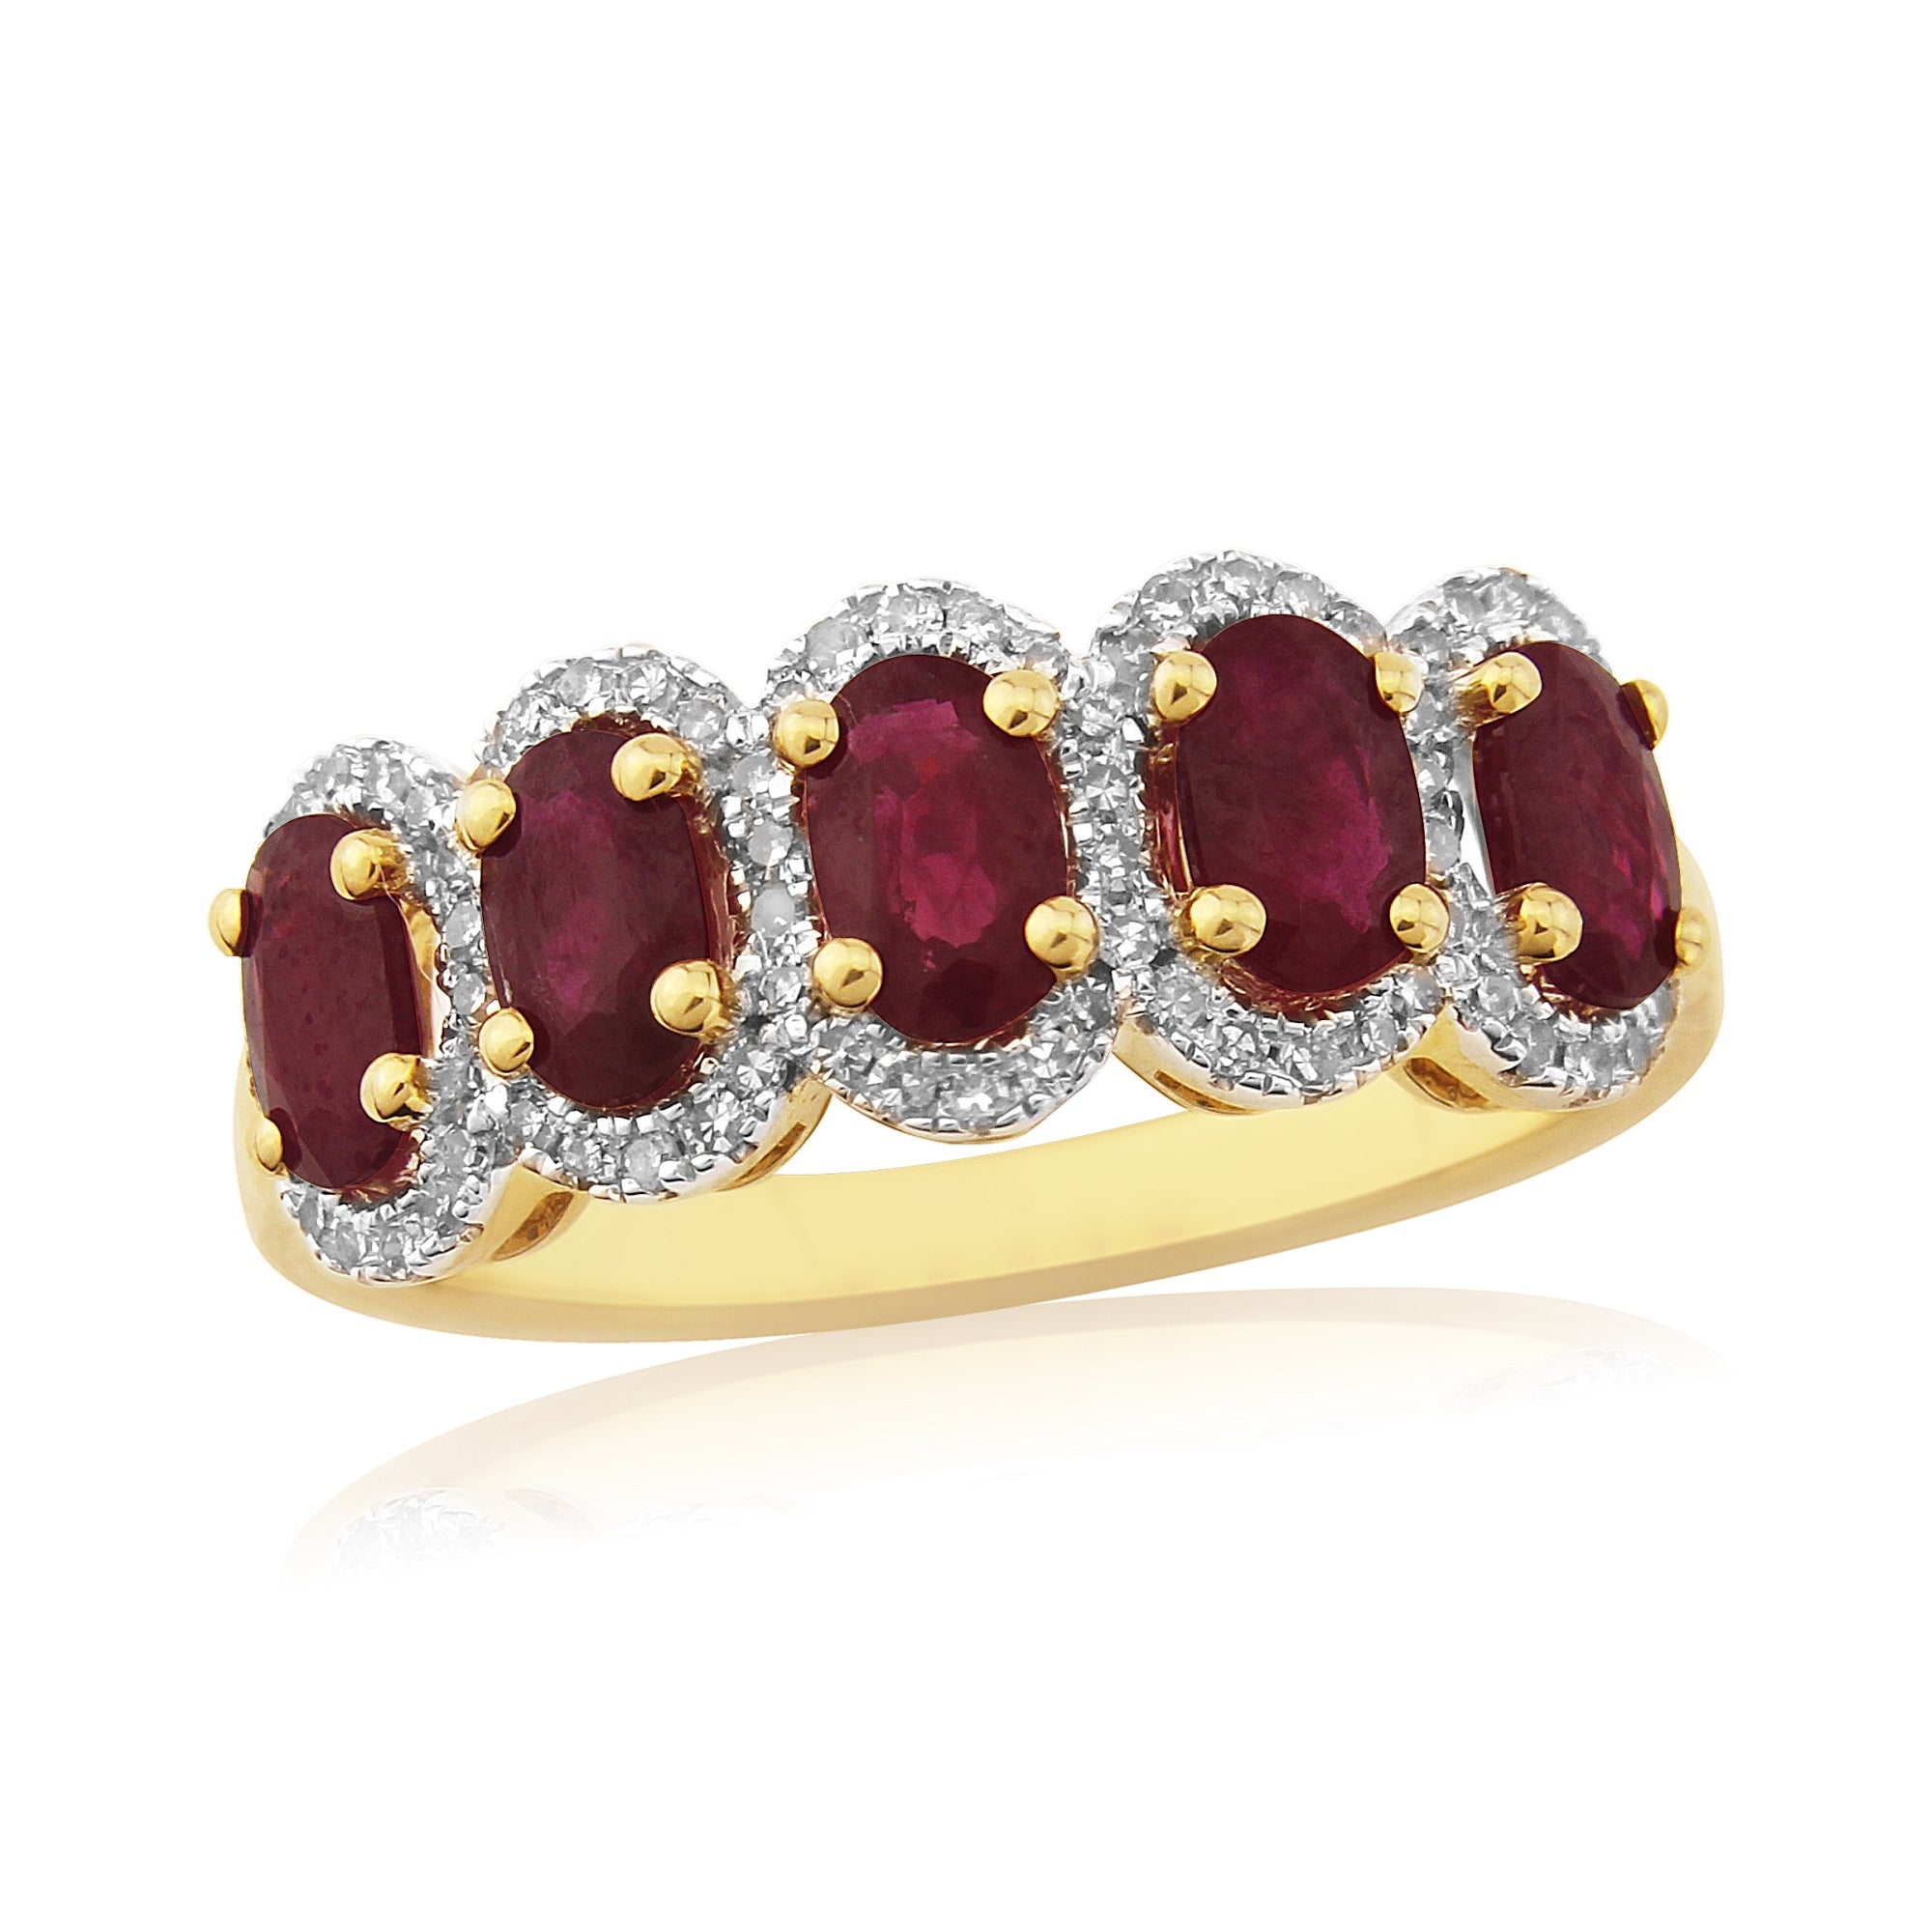 9ct gold multi 5x3mm oval ruby & diamond cluster ring 0.22ct